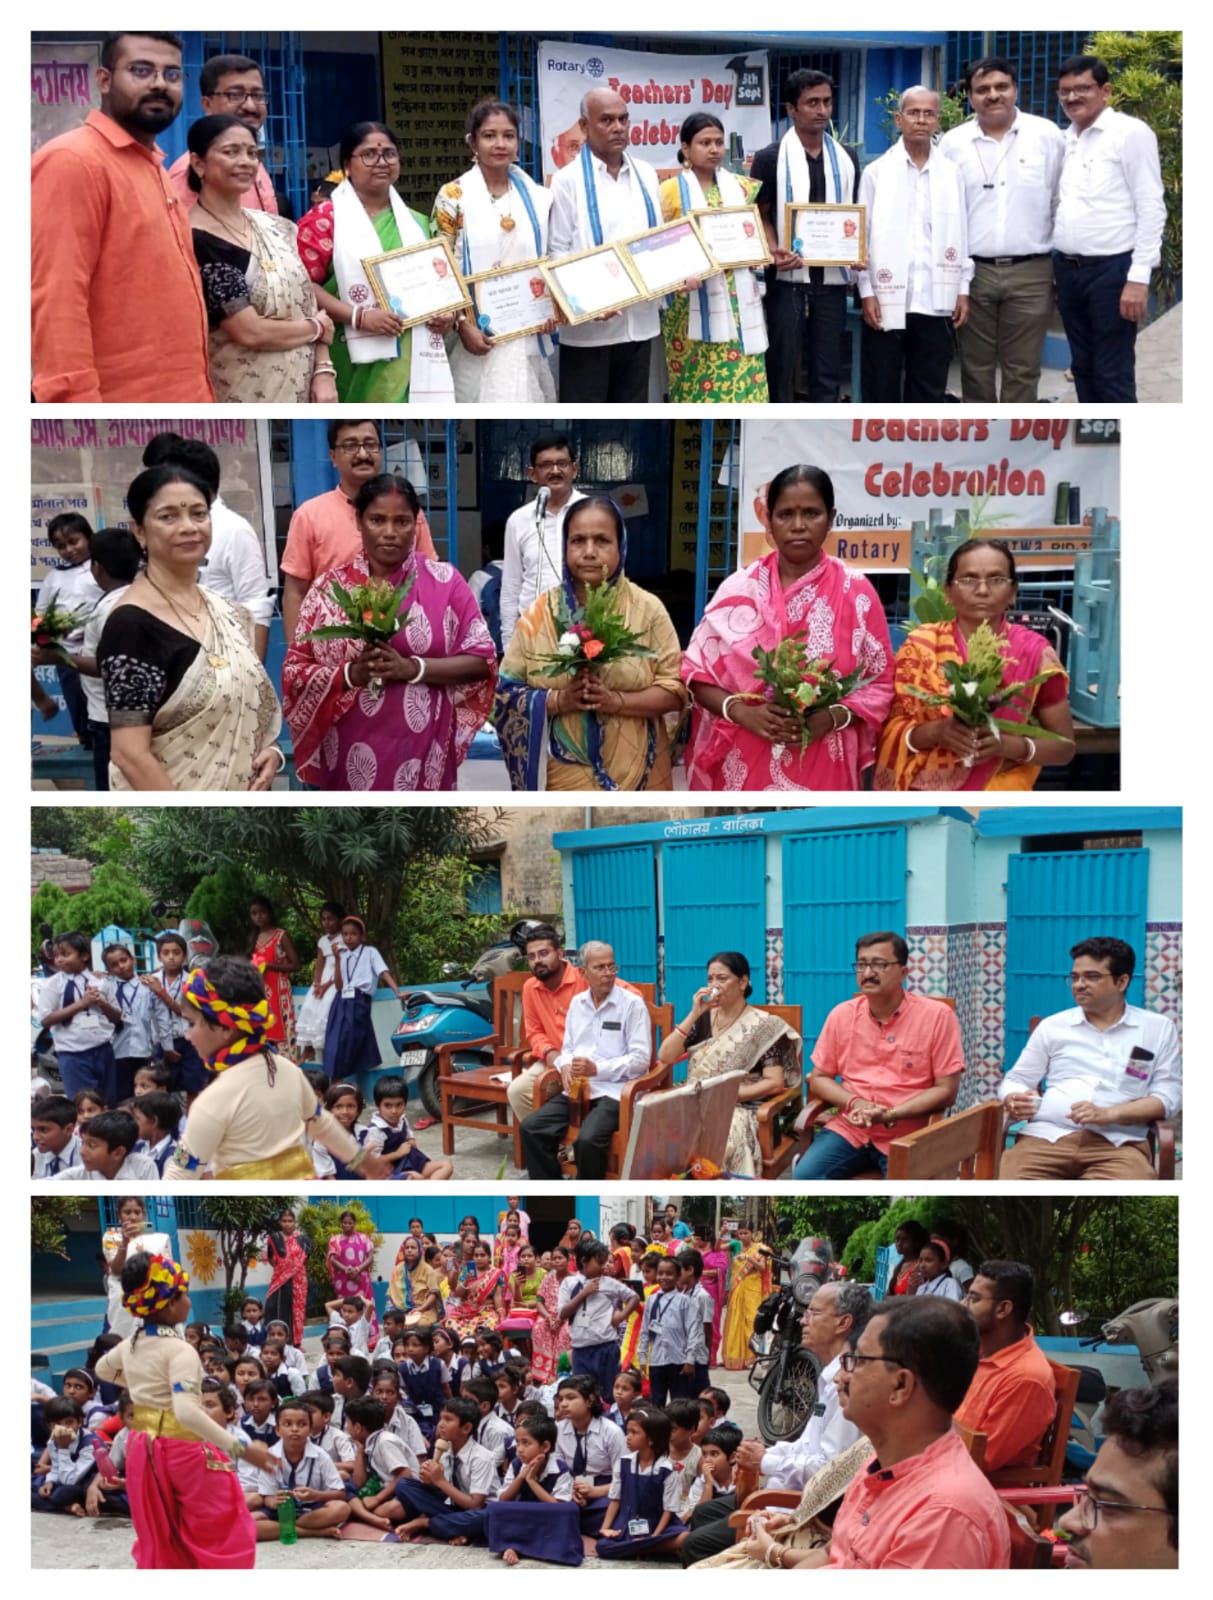 On 5th September, five teachers and four non-teaching staff of Agradwip primary school were congratulated to celebrate Teacher’s day.